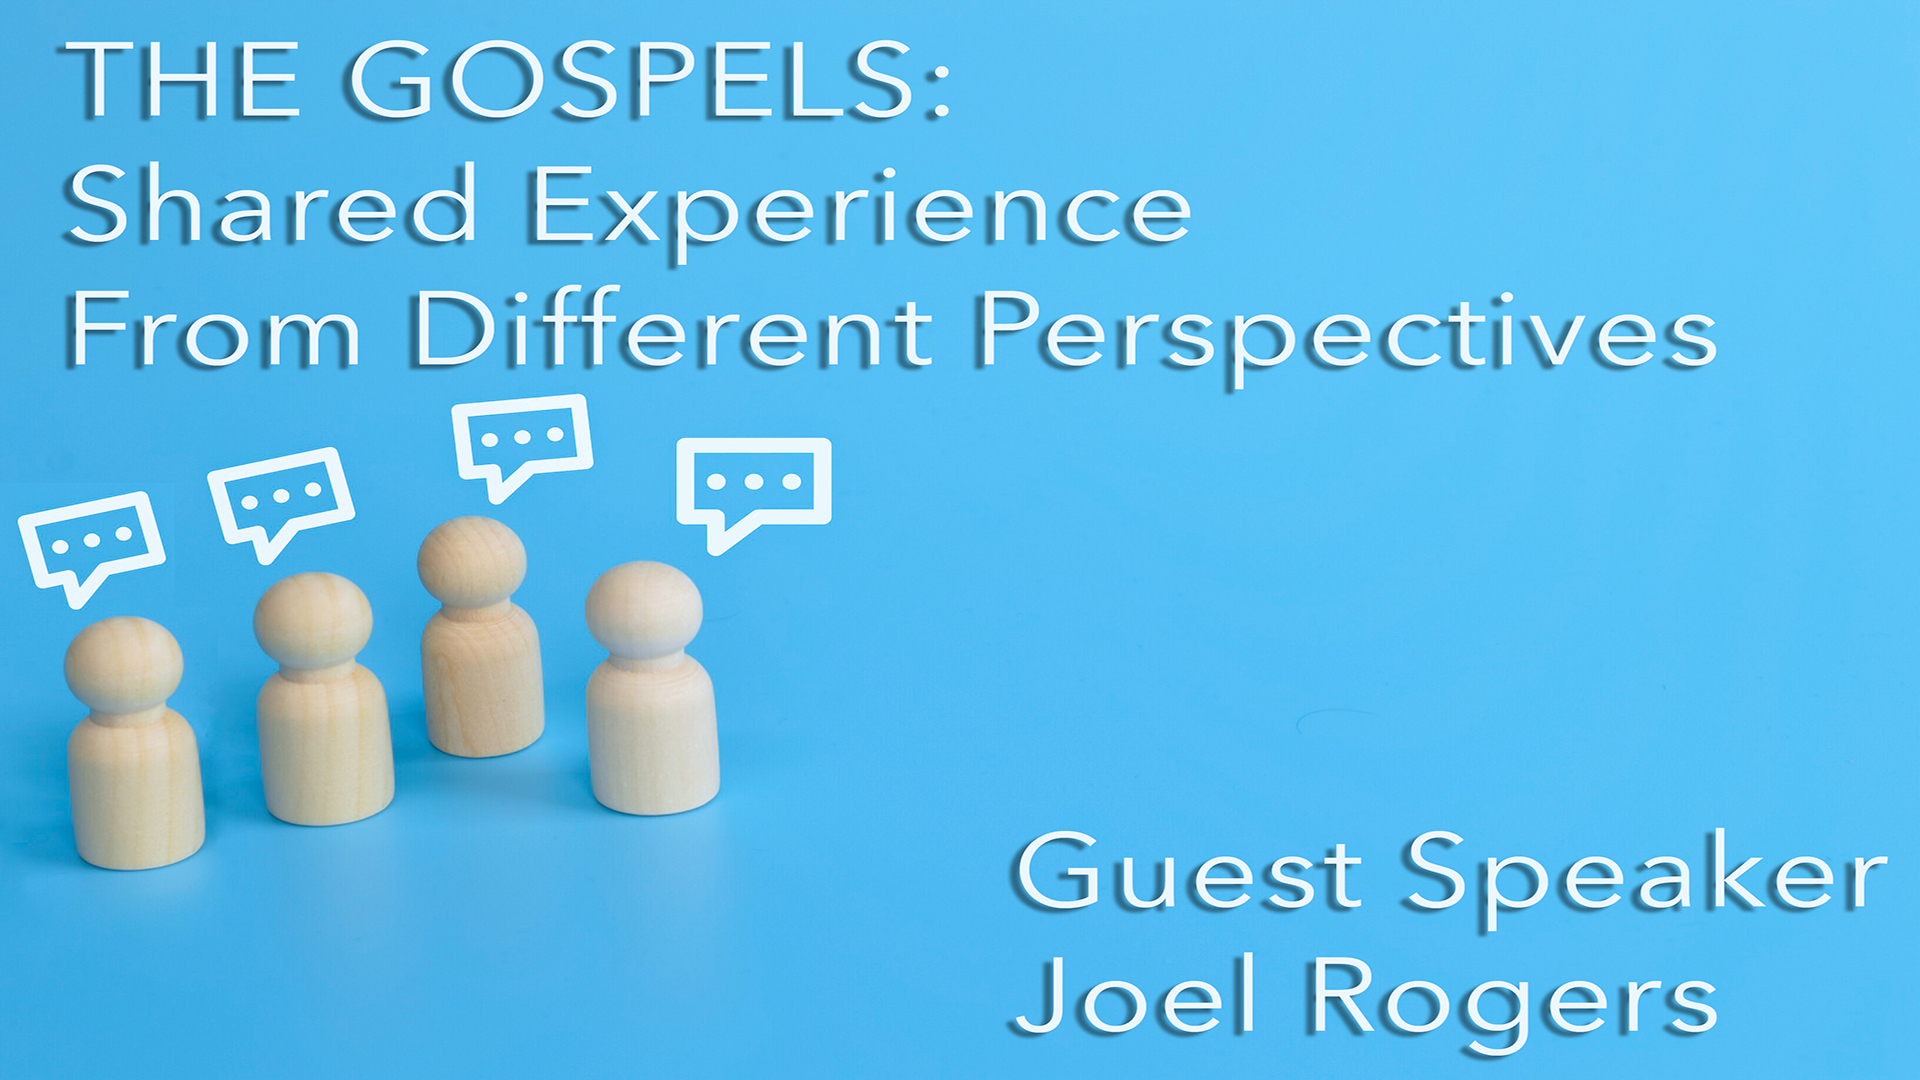 THE GOSPELS - Shared Experience from Different Perspectives